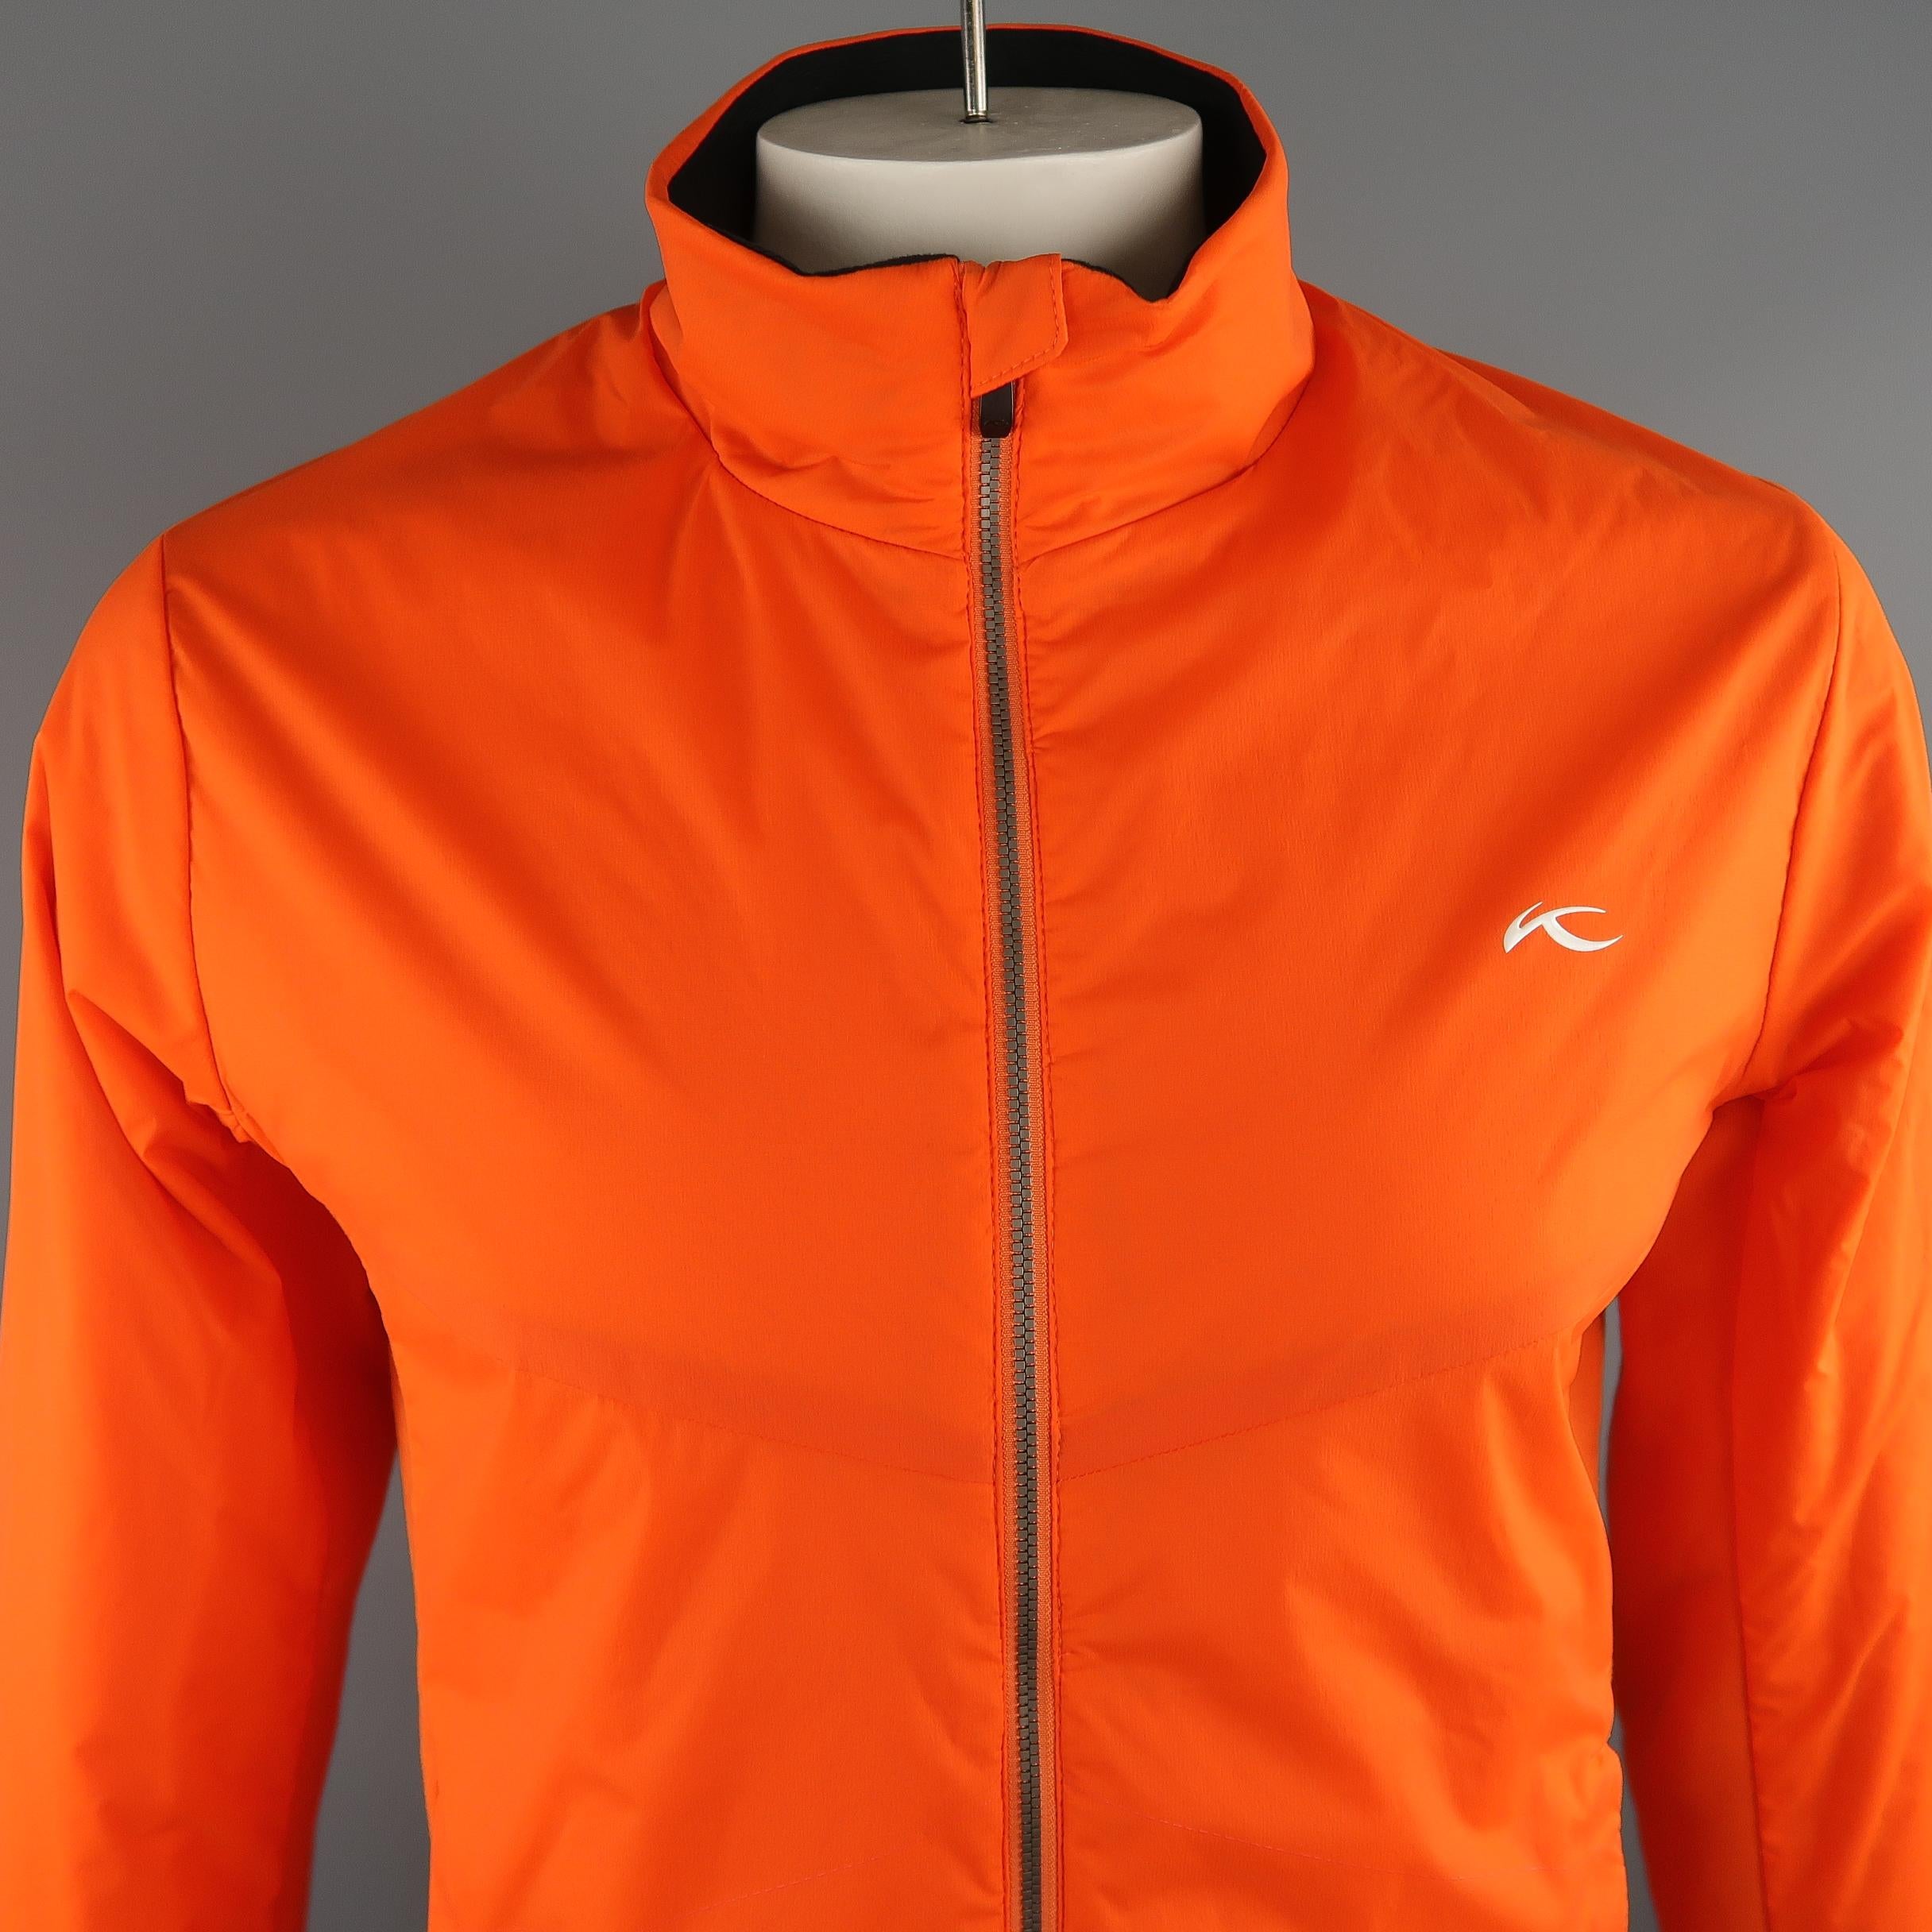 KJUS  jacket comes in a light weight orange polyamide material and features a lateral elastane padding , zip up, slit pockets. 
 
New with Tags.
Marked: 52 EU
 
Measurements:
 
Shoulder: 19 in.
Chest: 46 in.
Sleeve: 27 in.
Length: 29 in.